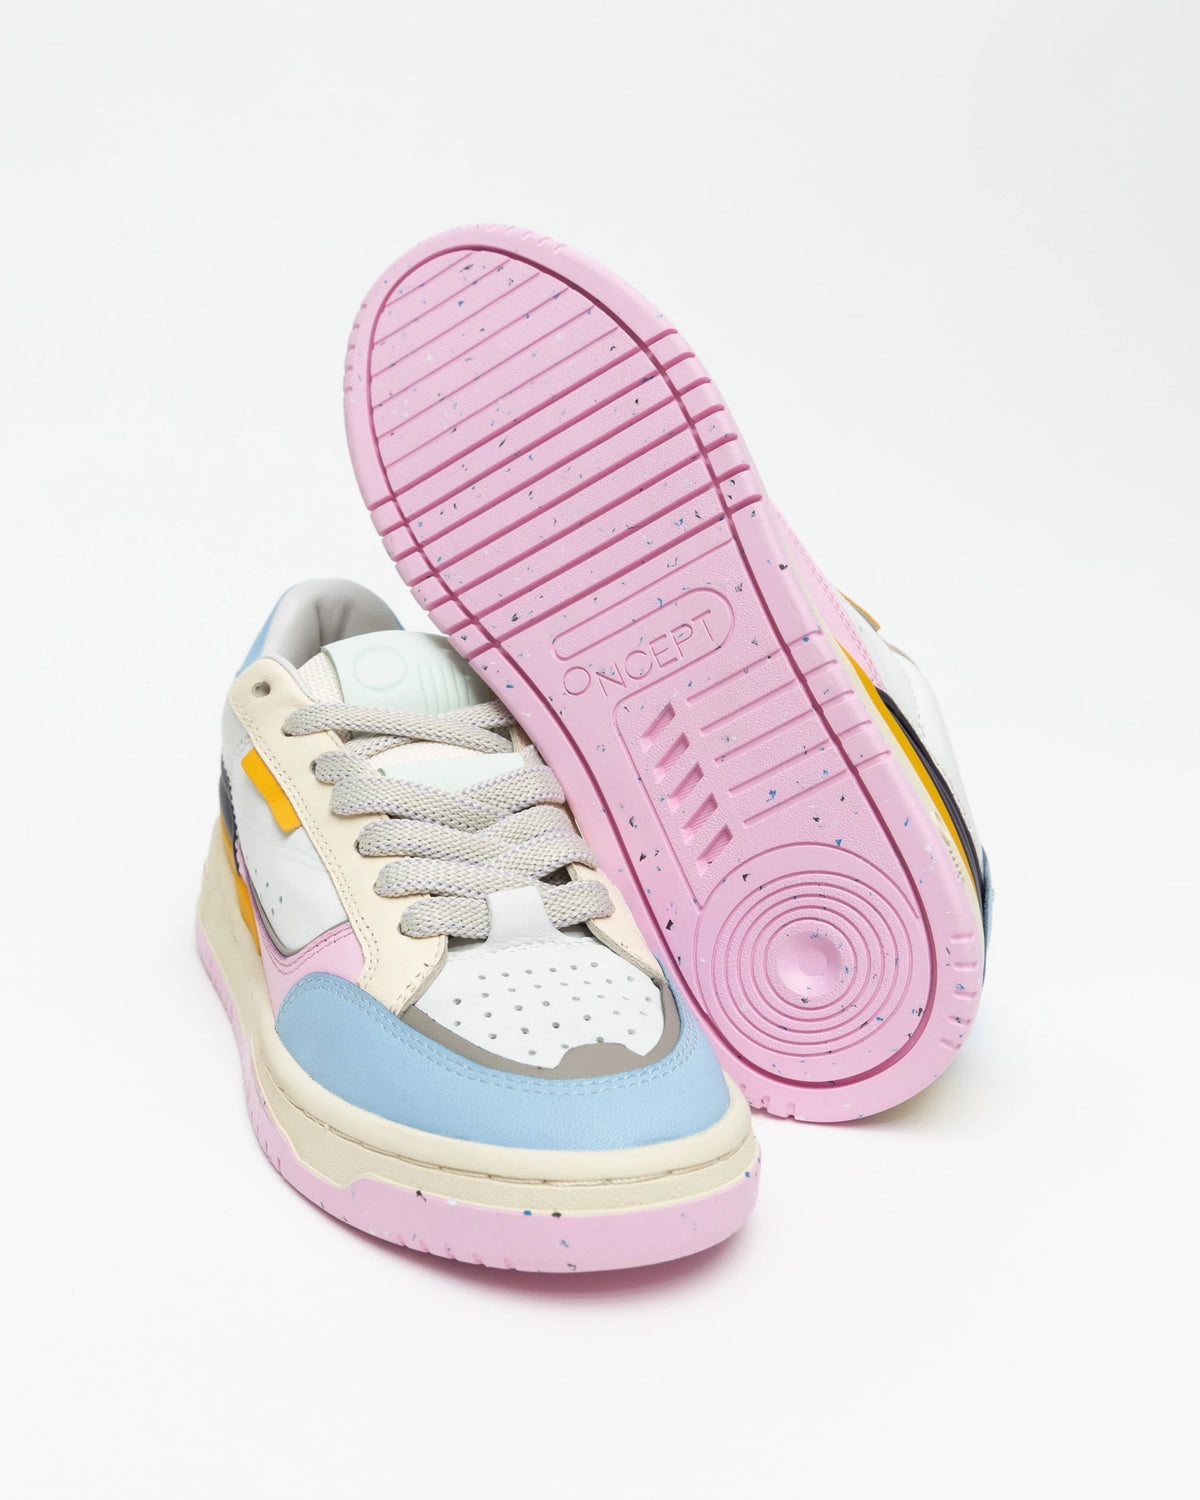 oncept paris sneaker in orchid multi-bottom view